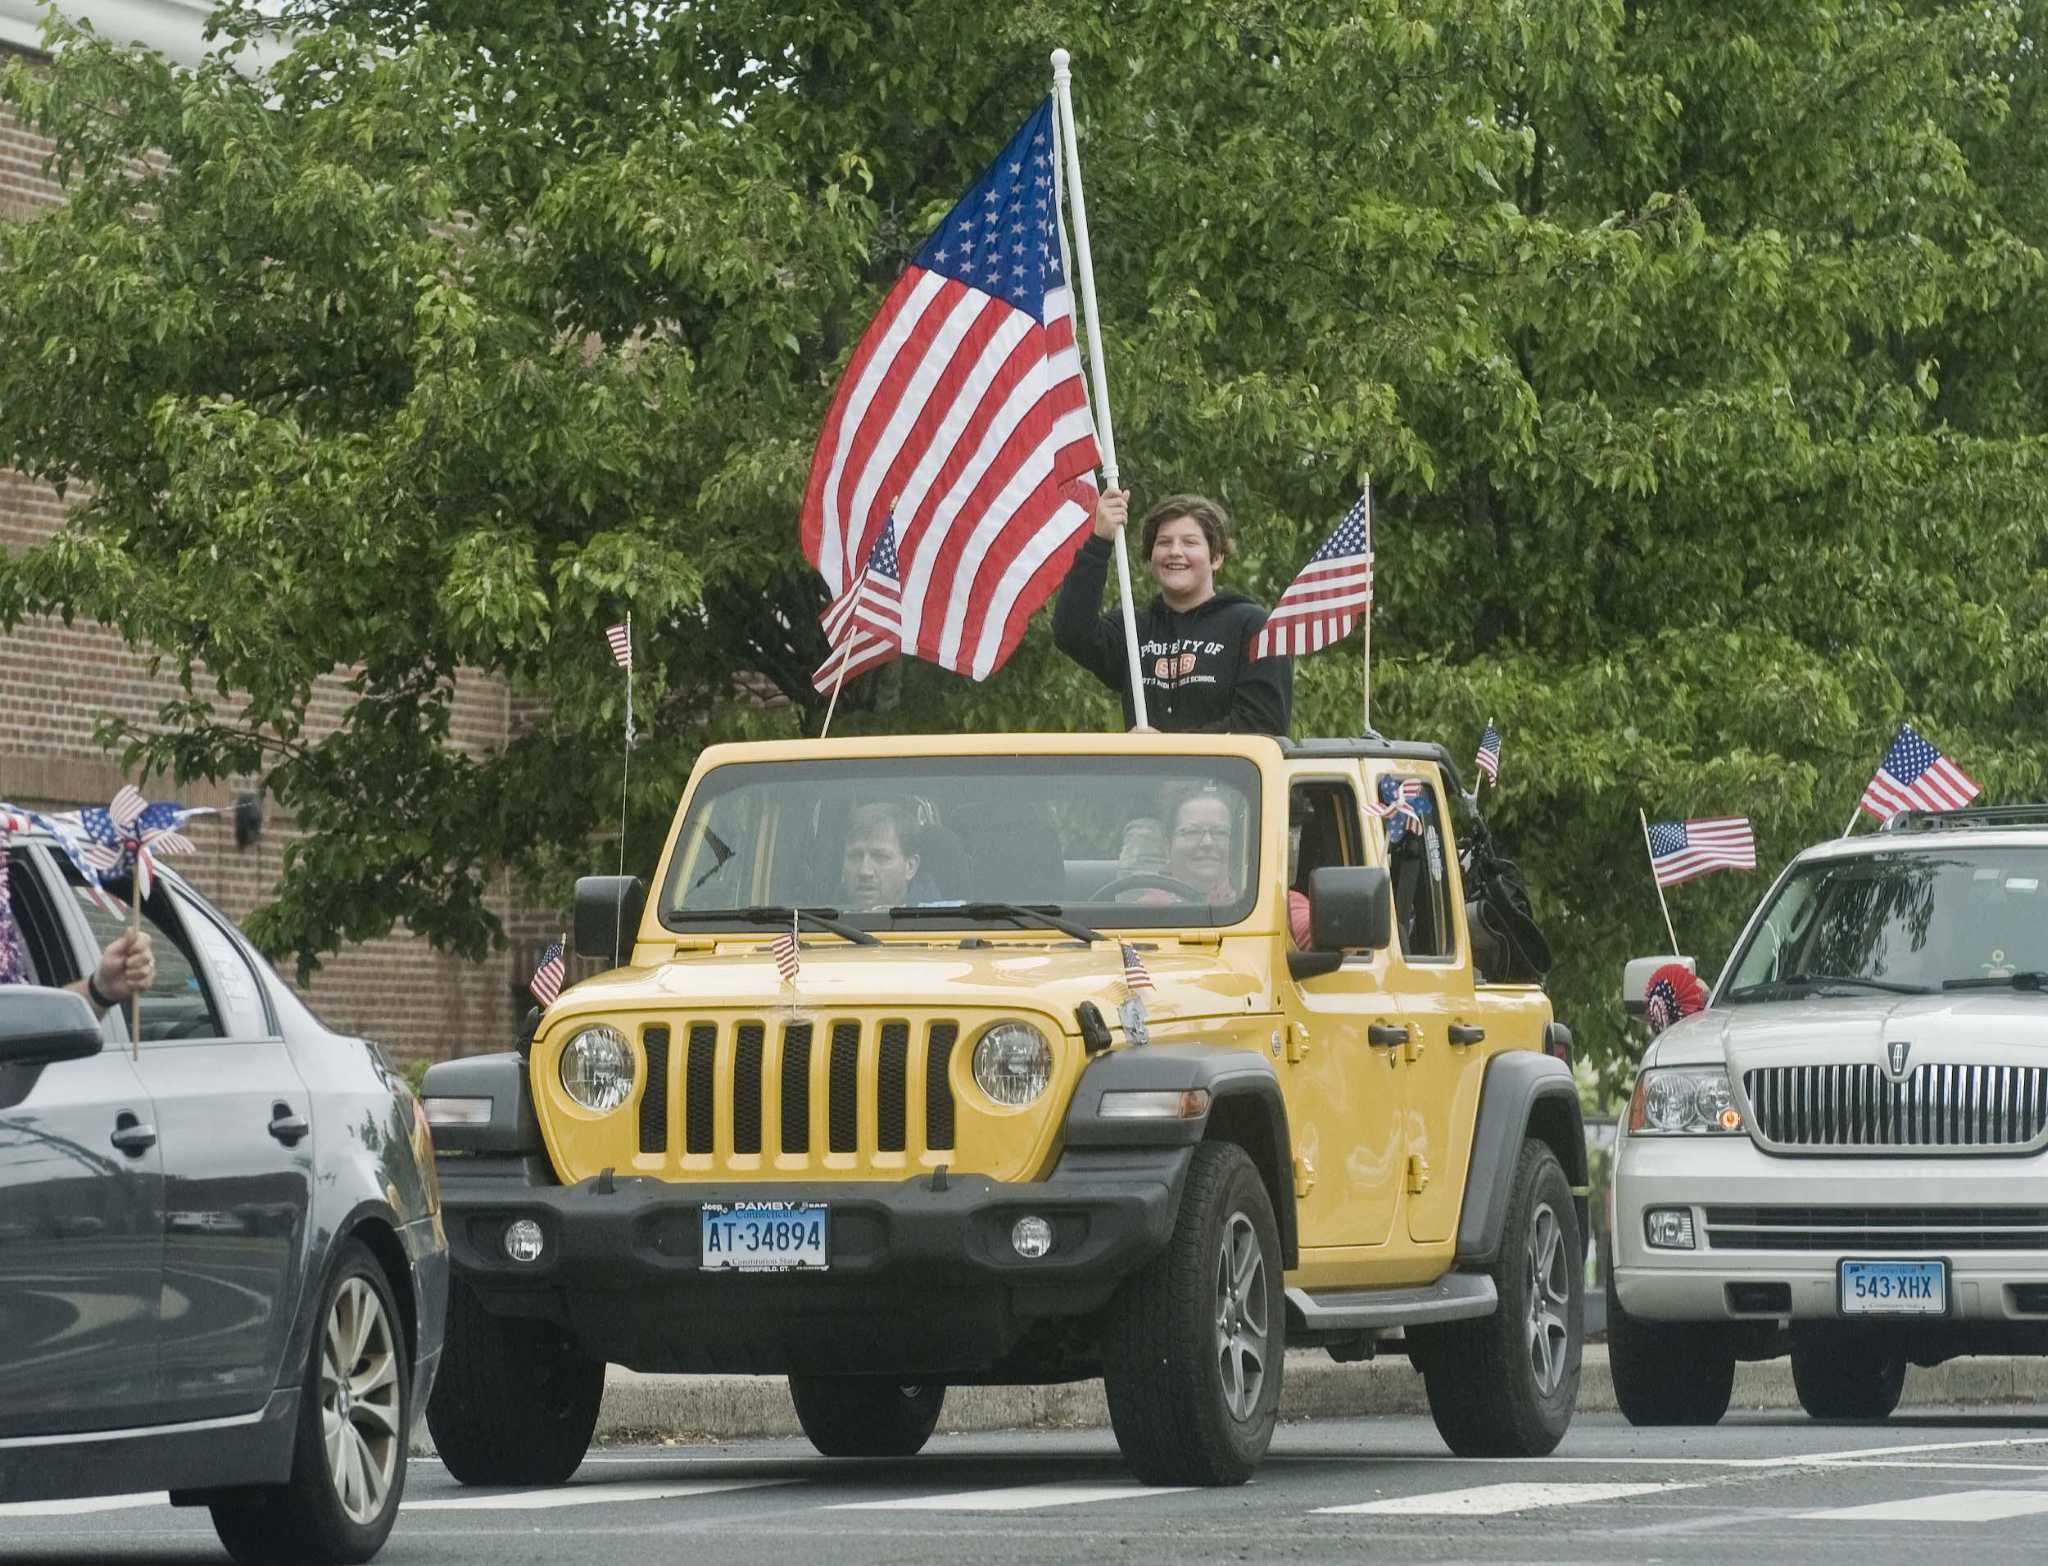 Ridgefield residents revive car parade for Memorial Day